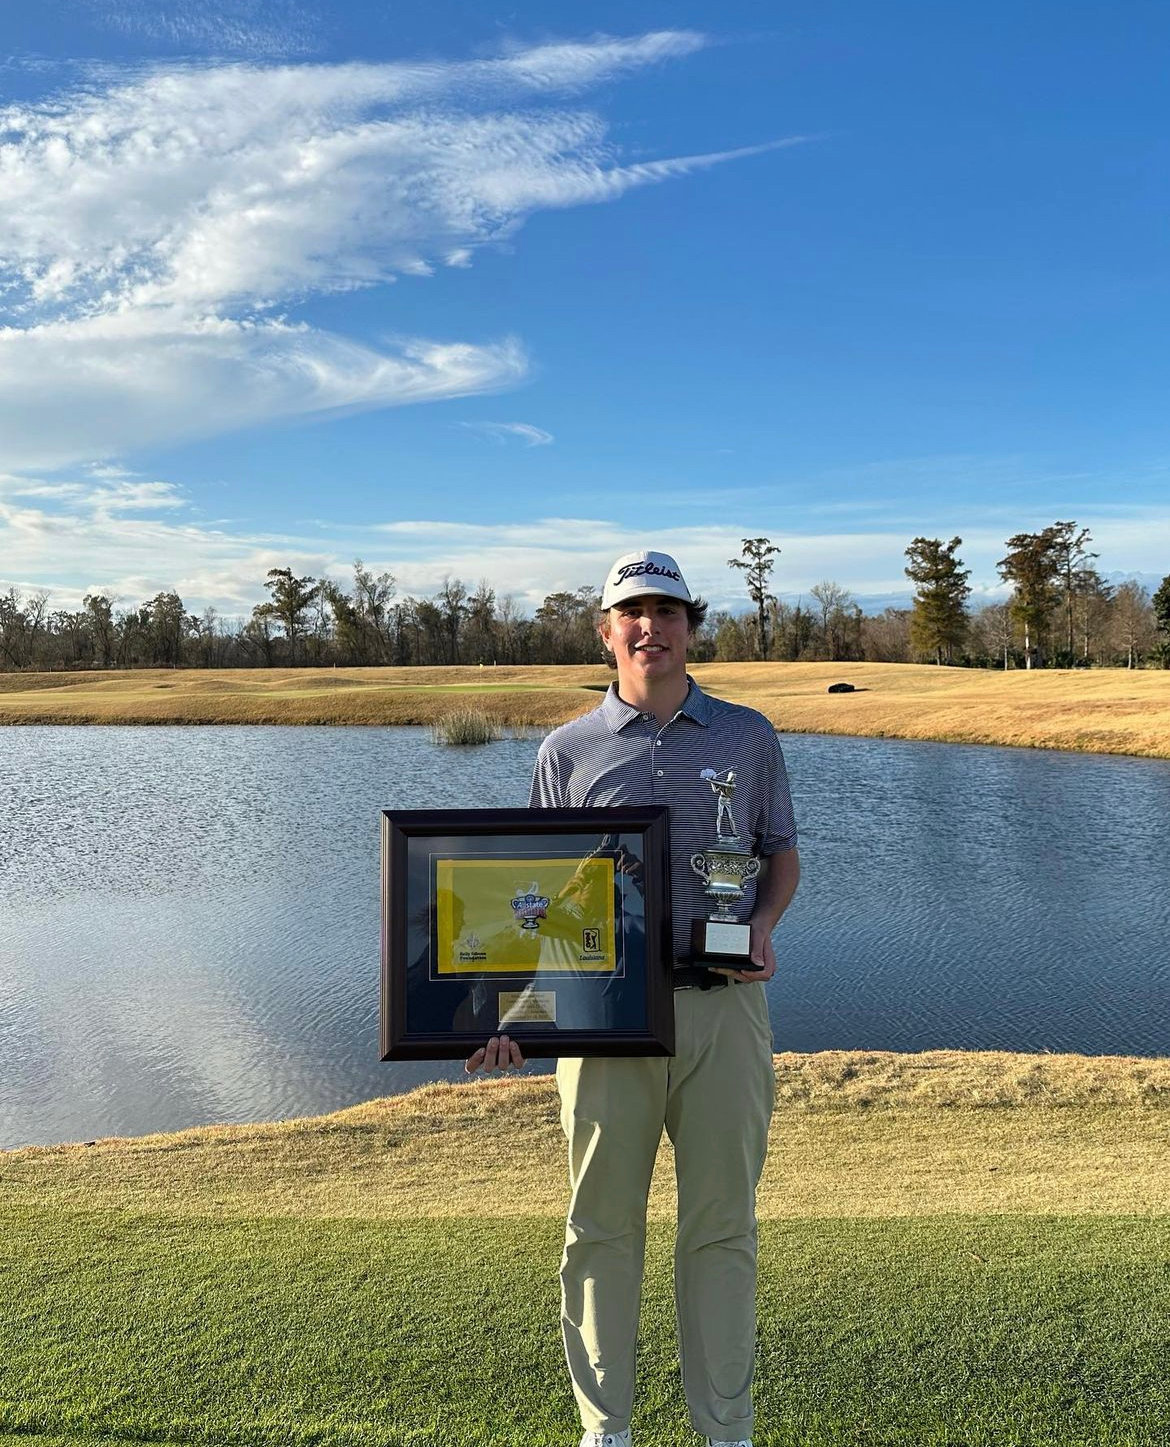 Trip Duke won the Allstate Sugar Bowl Tommy Moore Memorial at TPC Louisiana on Dec. 28, 2022, after he won the playoff hole with a 15-foot putt. Last weekend, Duke announced his commitment to the Mississippi State Bulldogs.